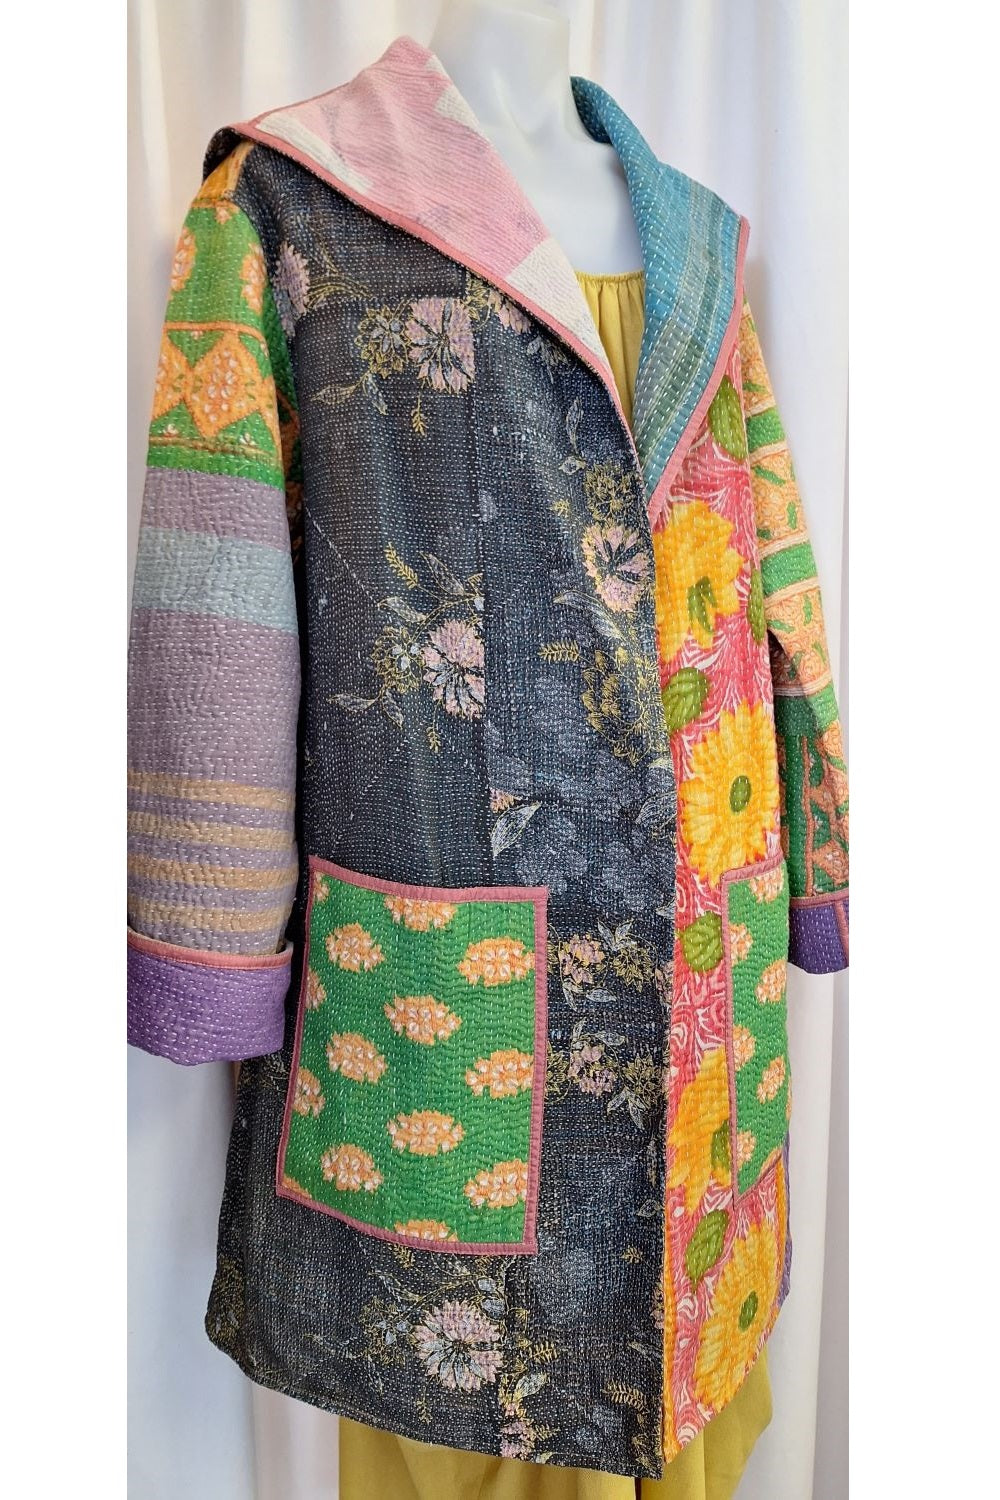 Square Collar with Detailed Kantha Stitch Coat, Reversible - S